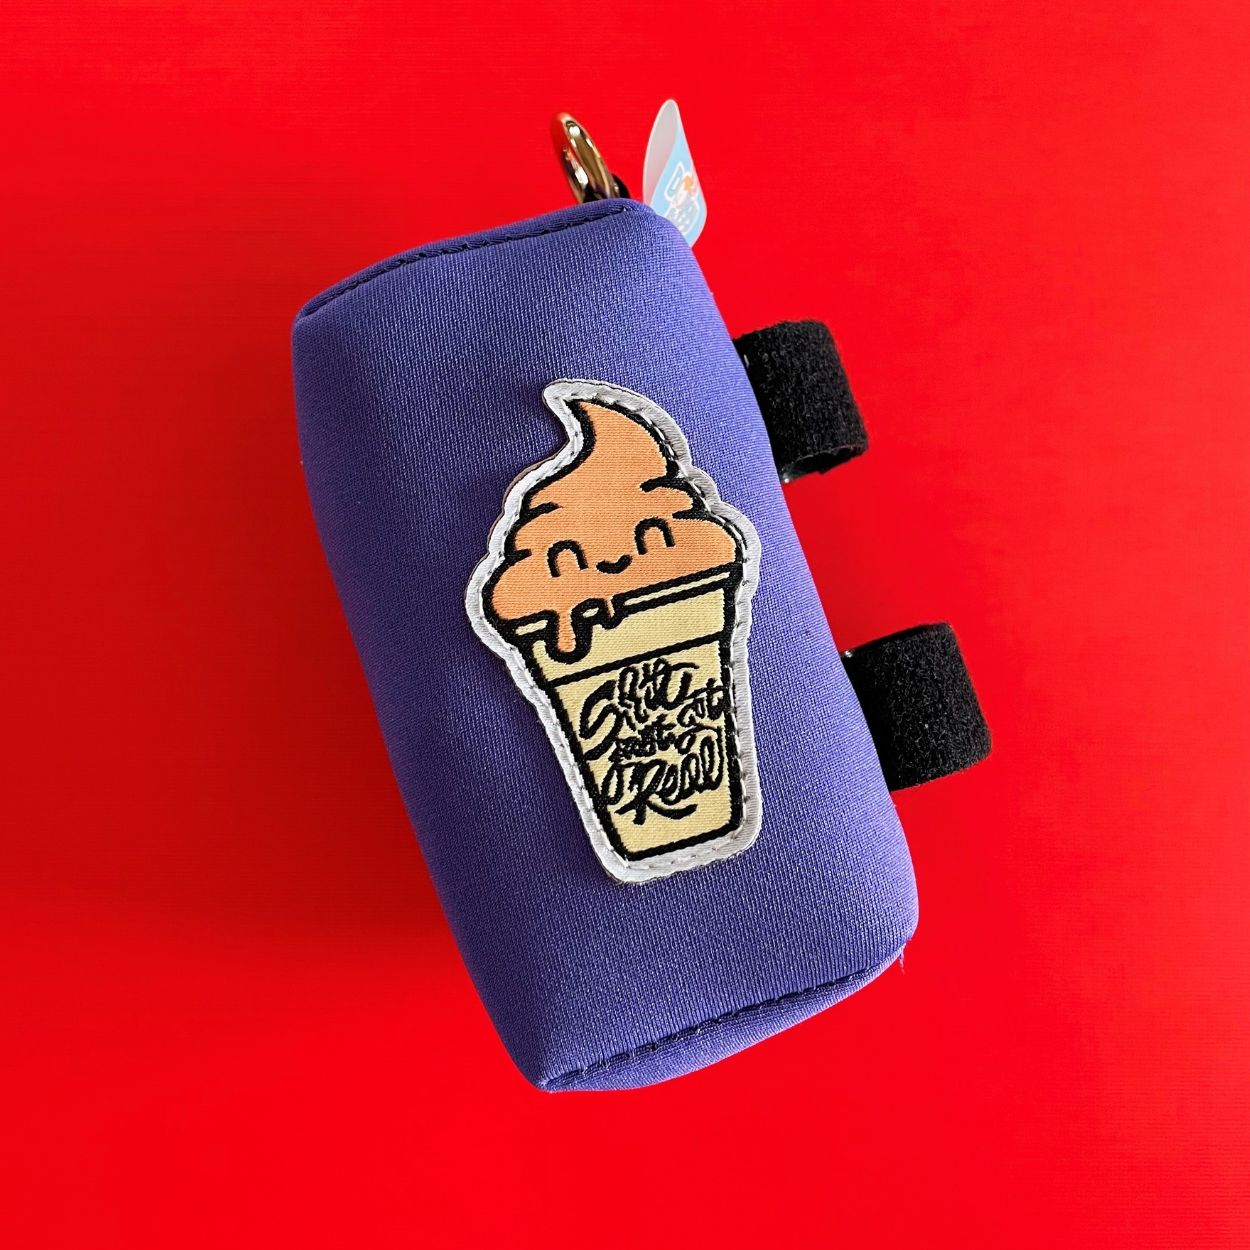 Poop Bag Dispenser - "Shit Just Got Real" Red Background - Doggy Style Pet Products